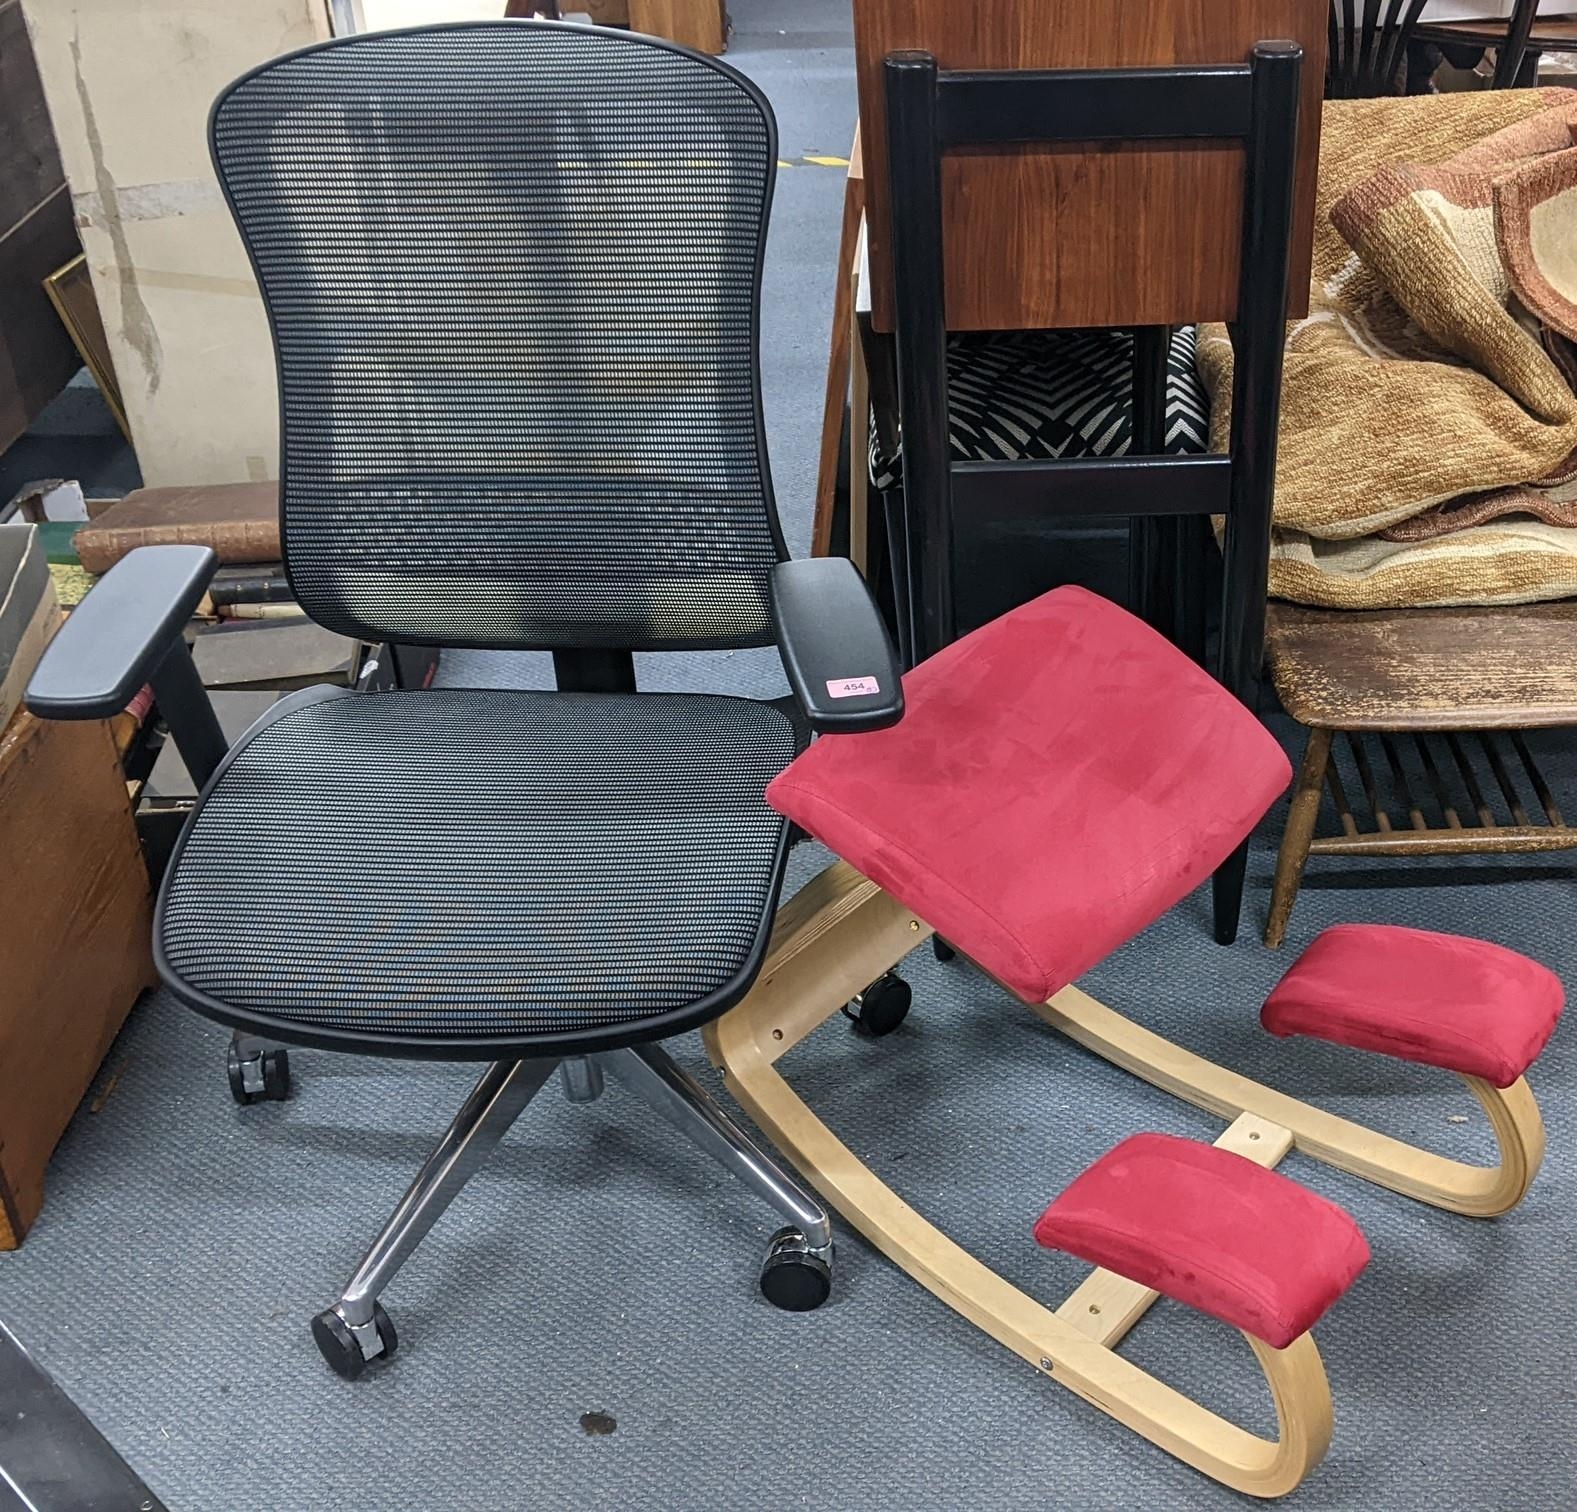 One swivel chair with armrests on castors, together with one keeling chair upholstered in red fabric